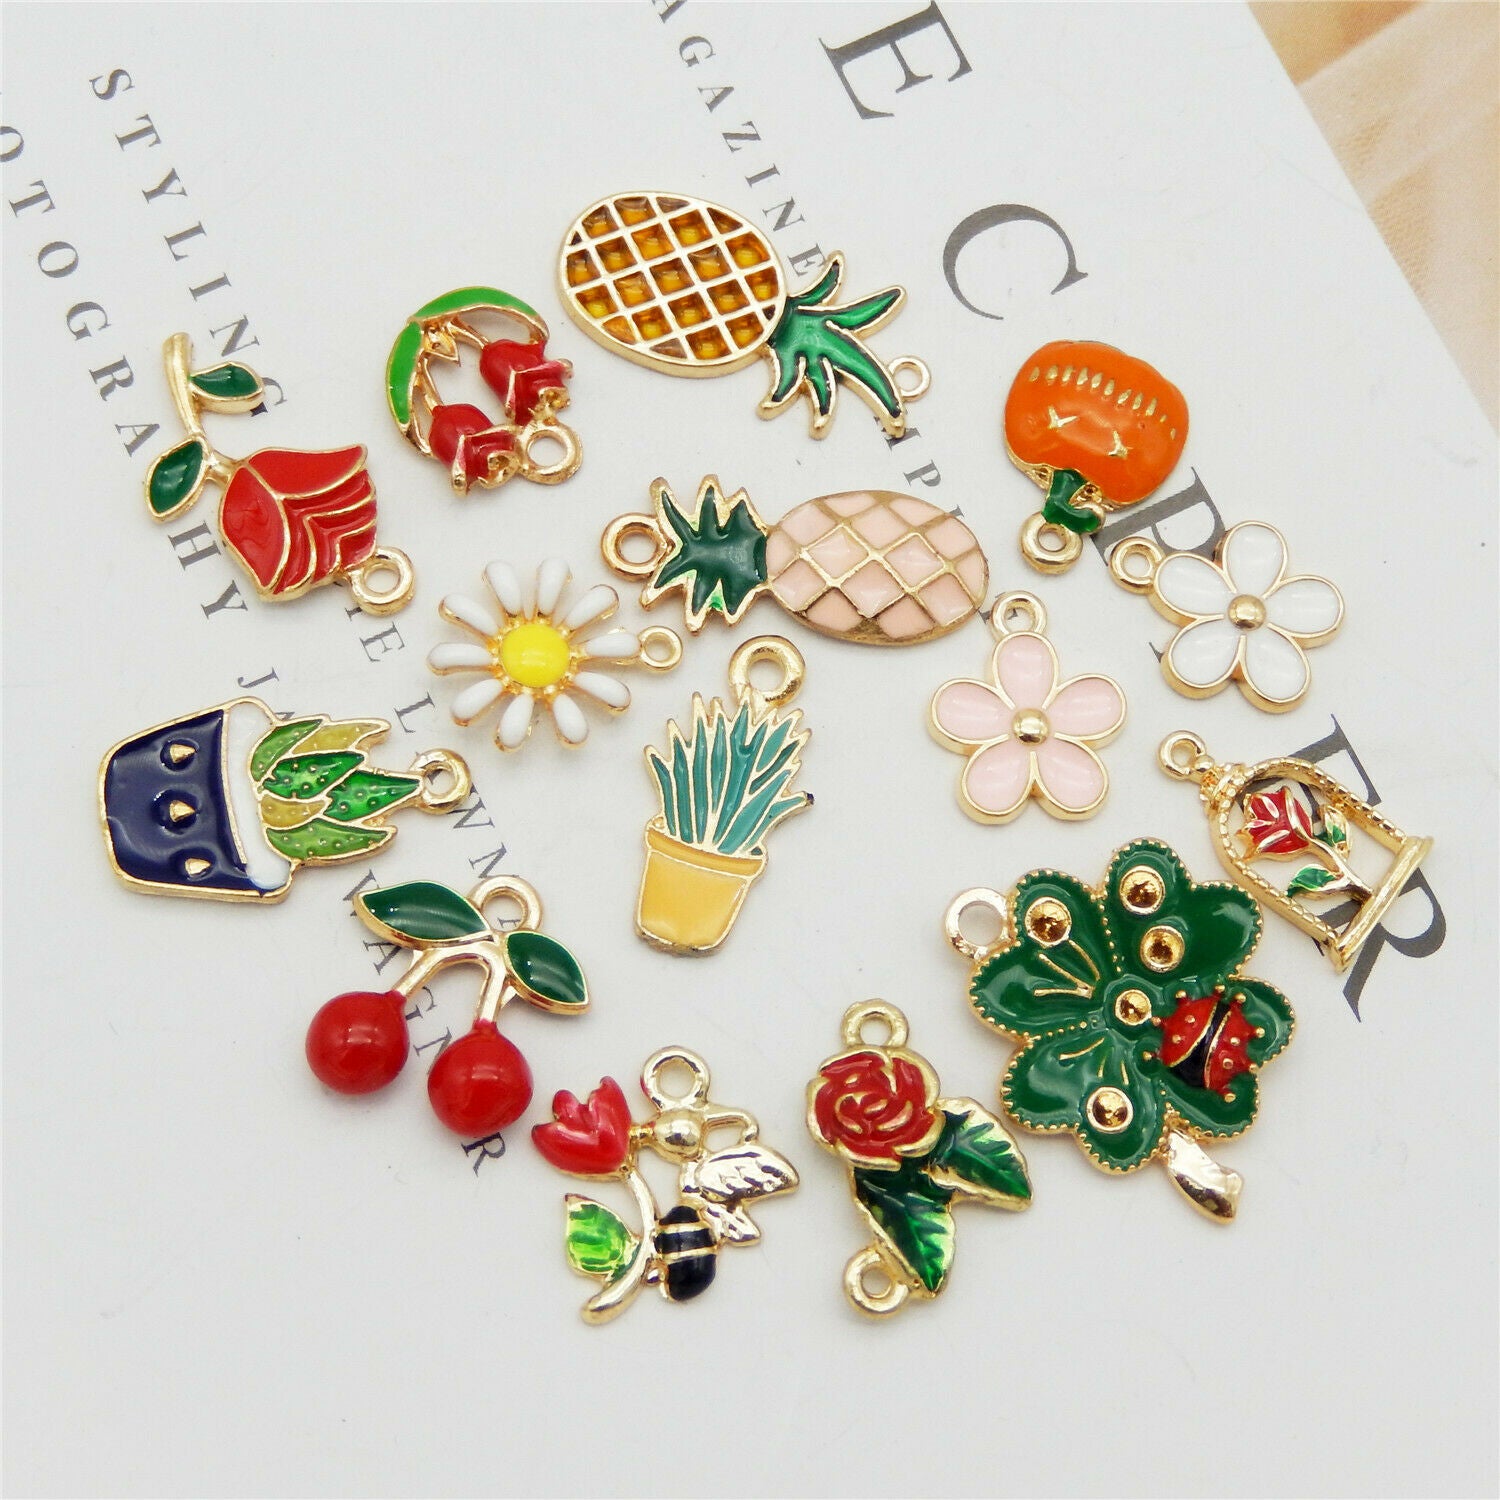 10 Mix Enamel Flowers Fruits Plants Charms Alloy Pendant Keychain Jewelry Crafts